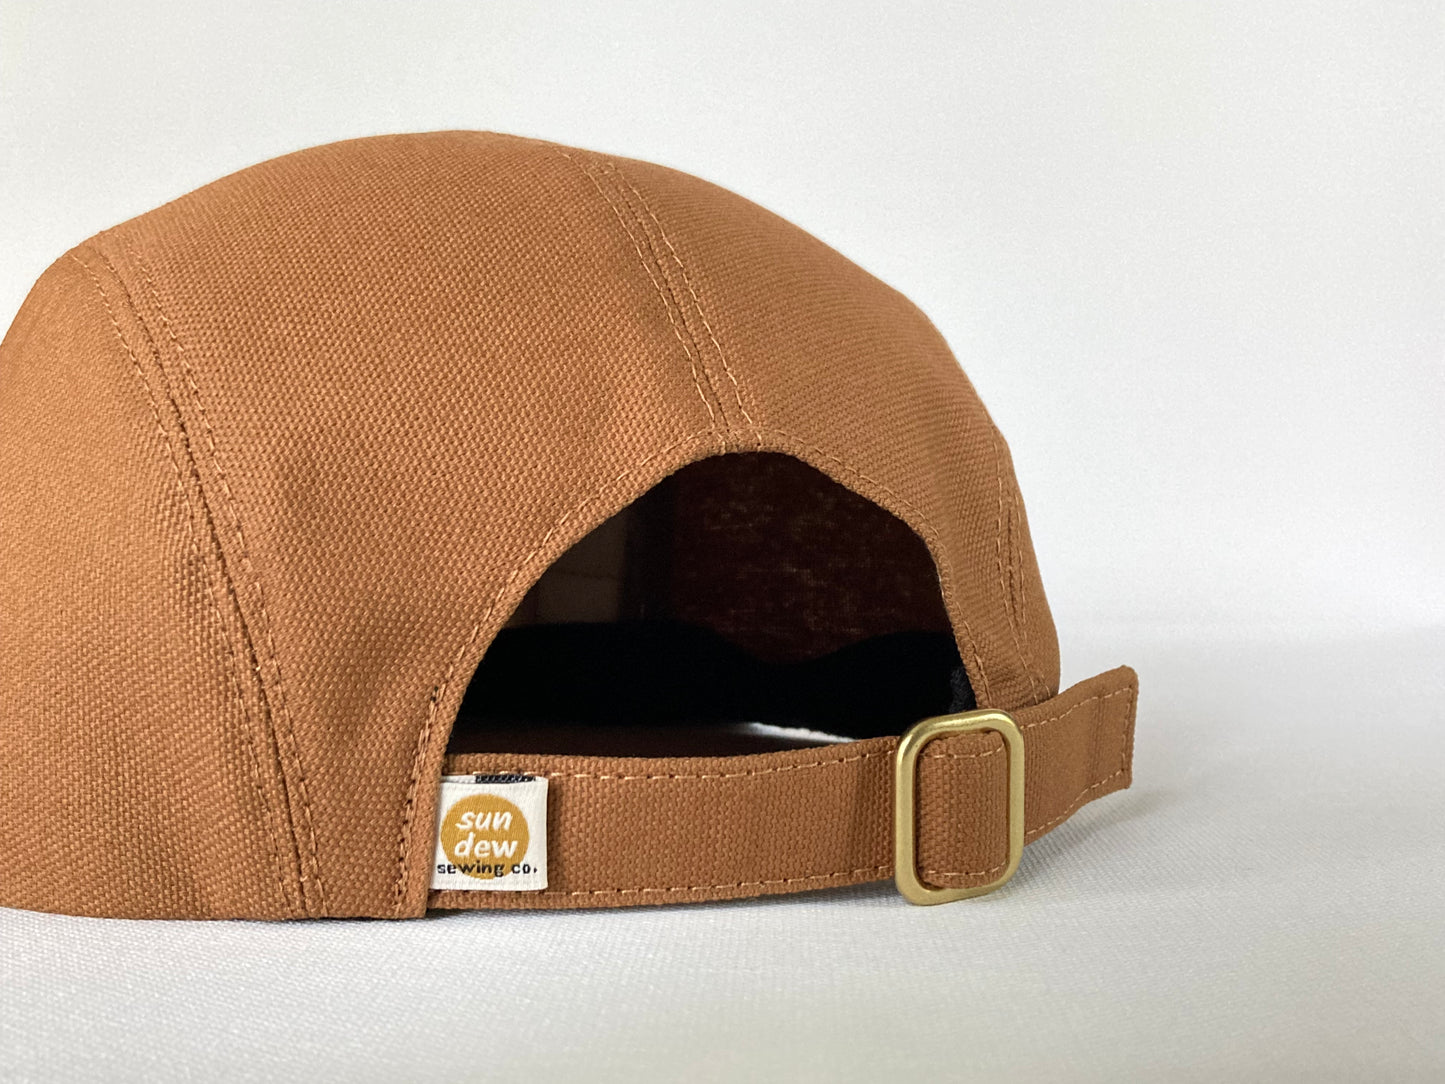 Hand Printed Camp Hat - Mulberry Shift